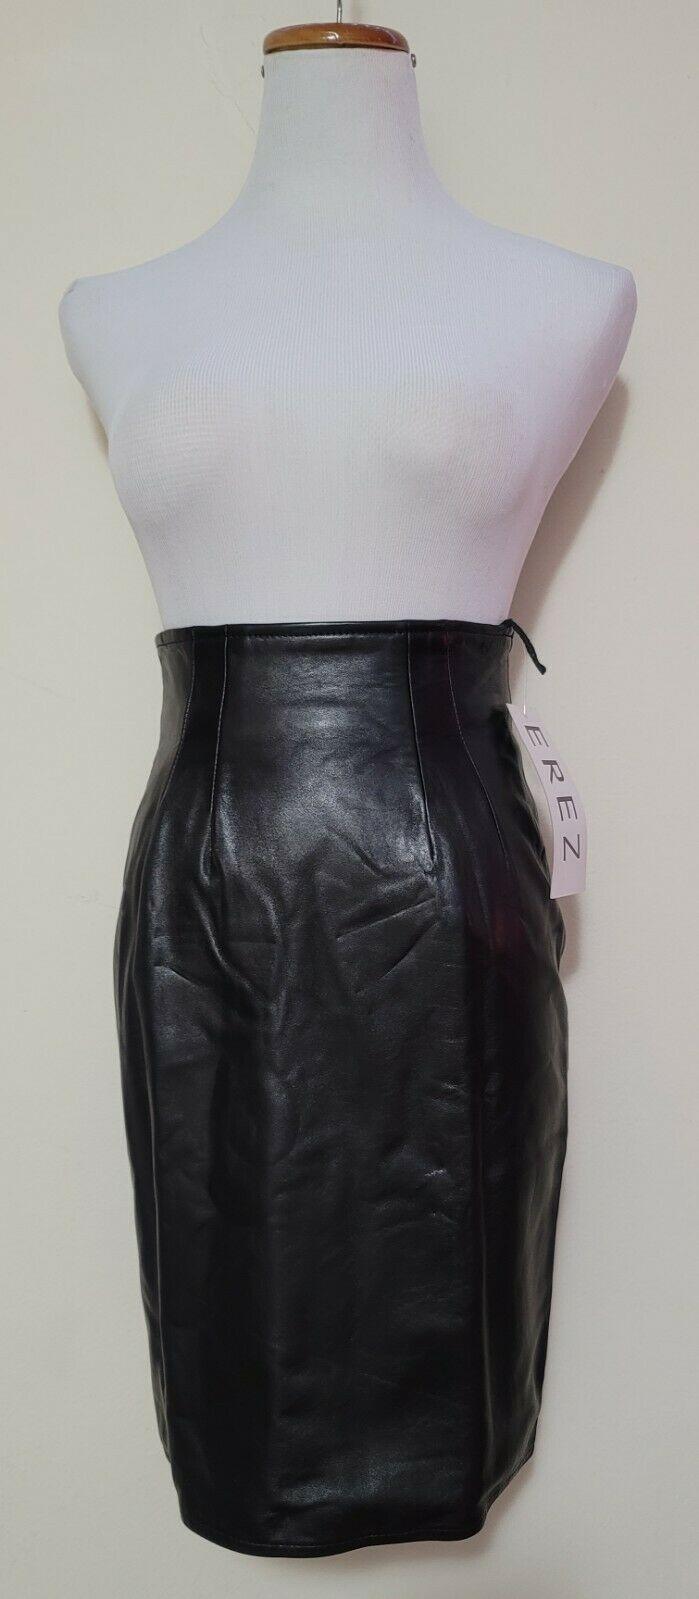 EREZ Lamb Leather High Waist Skirt Fitted Pencil Skirt Soft Leather Size 6 - SVNYFancy